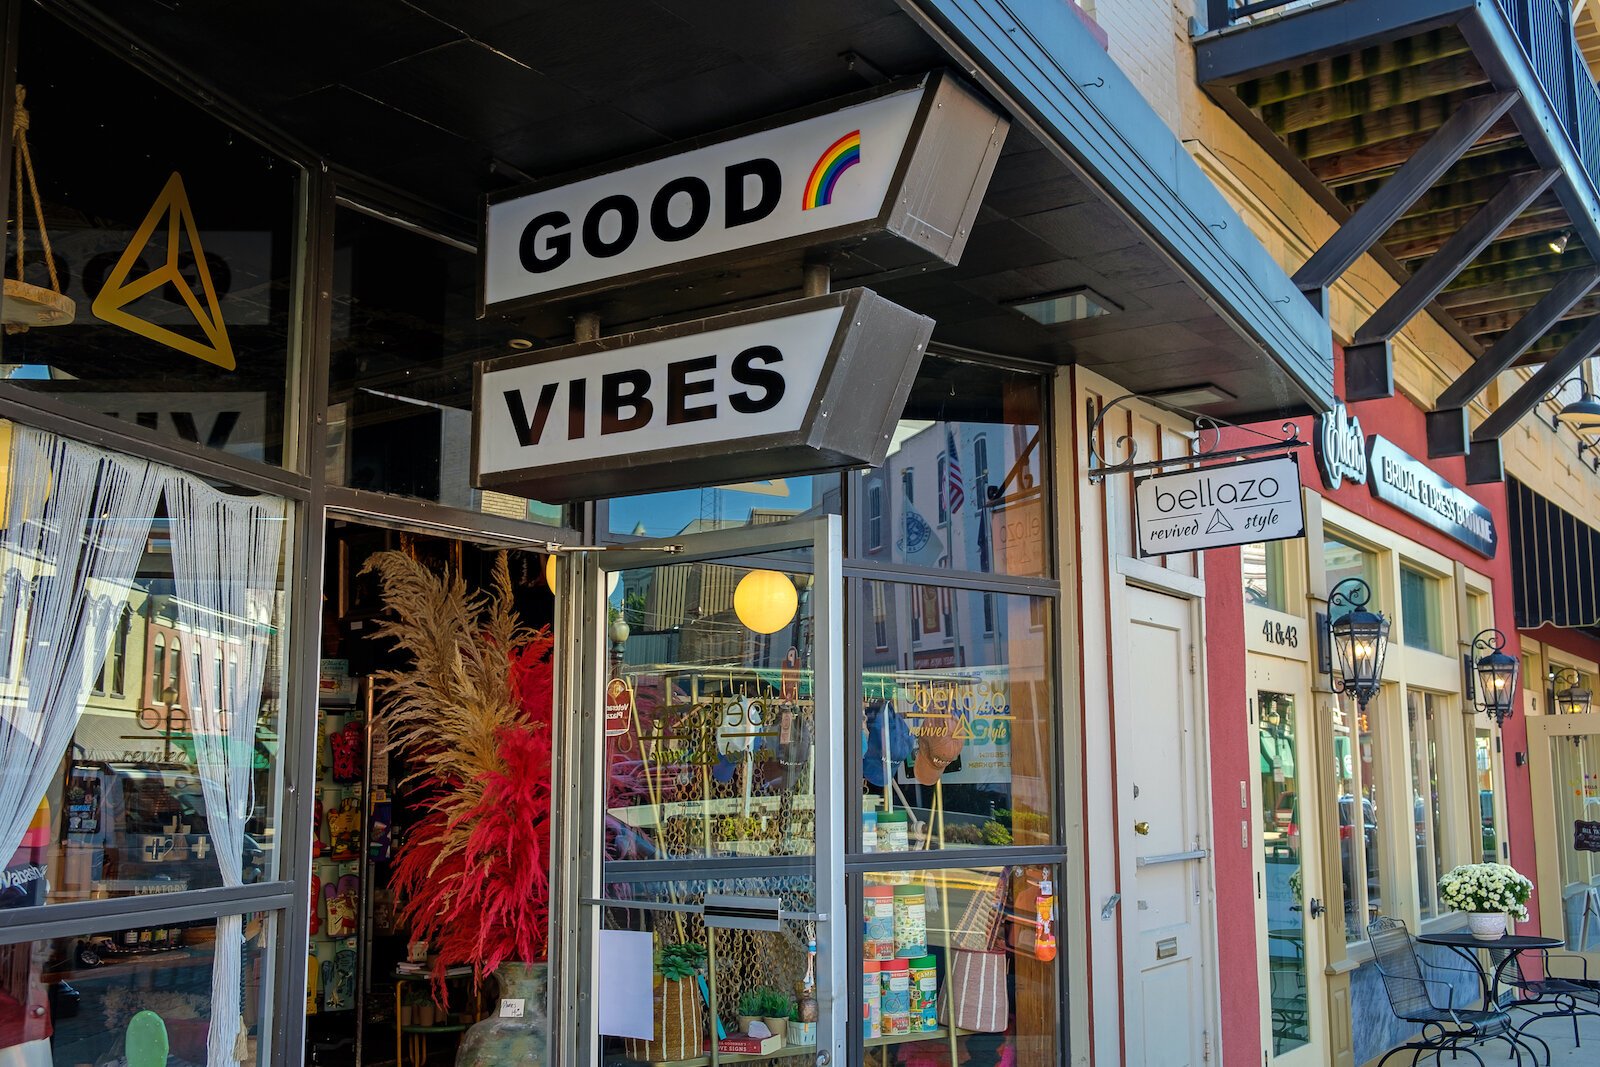 Bellazo and the Good Vibes Gift Shop 35 W. Market St. in Downtown Wabash.